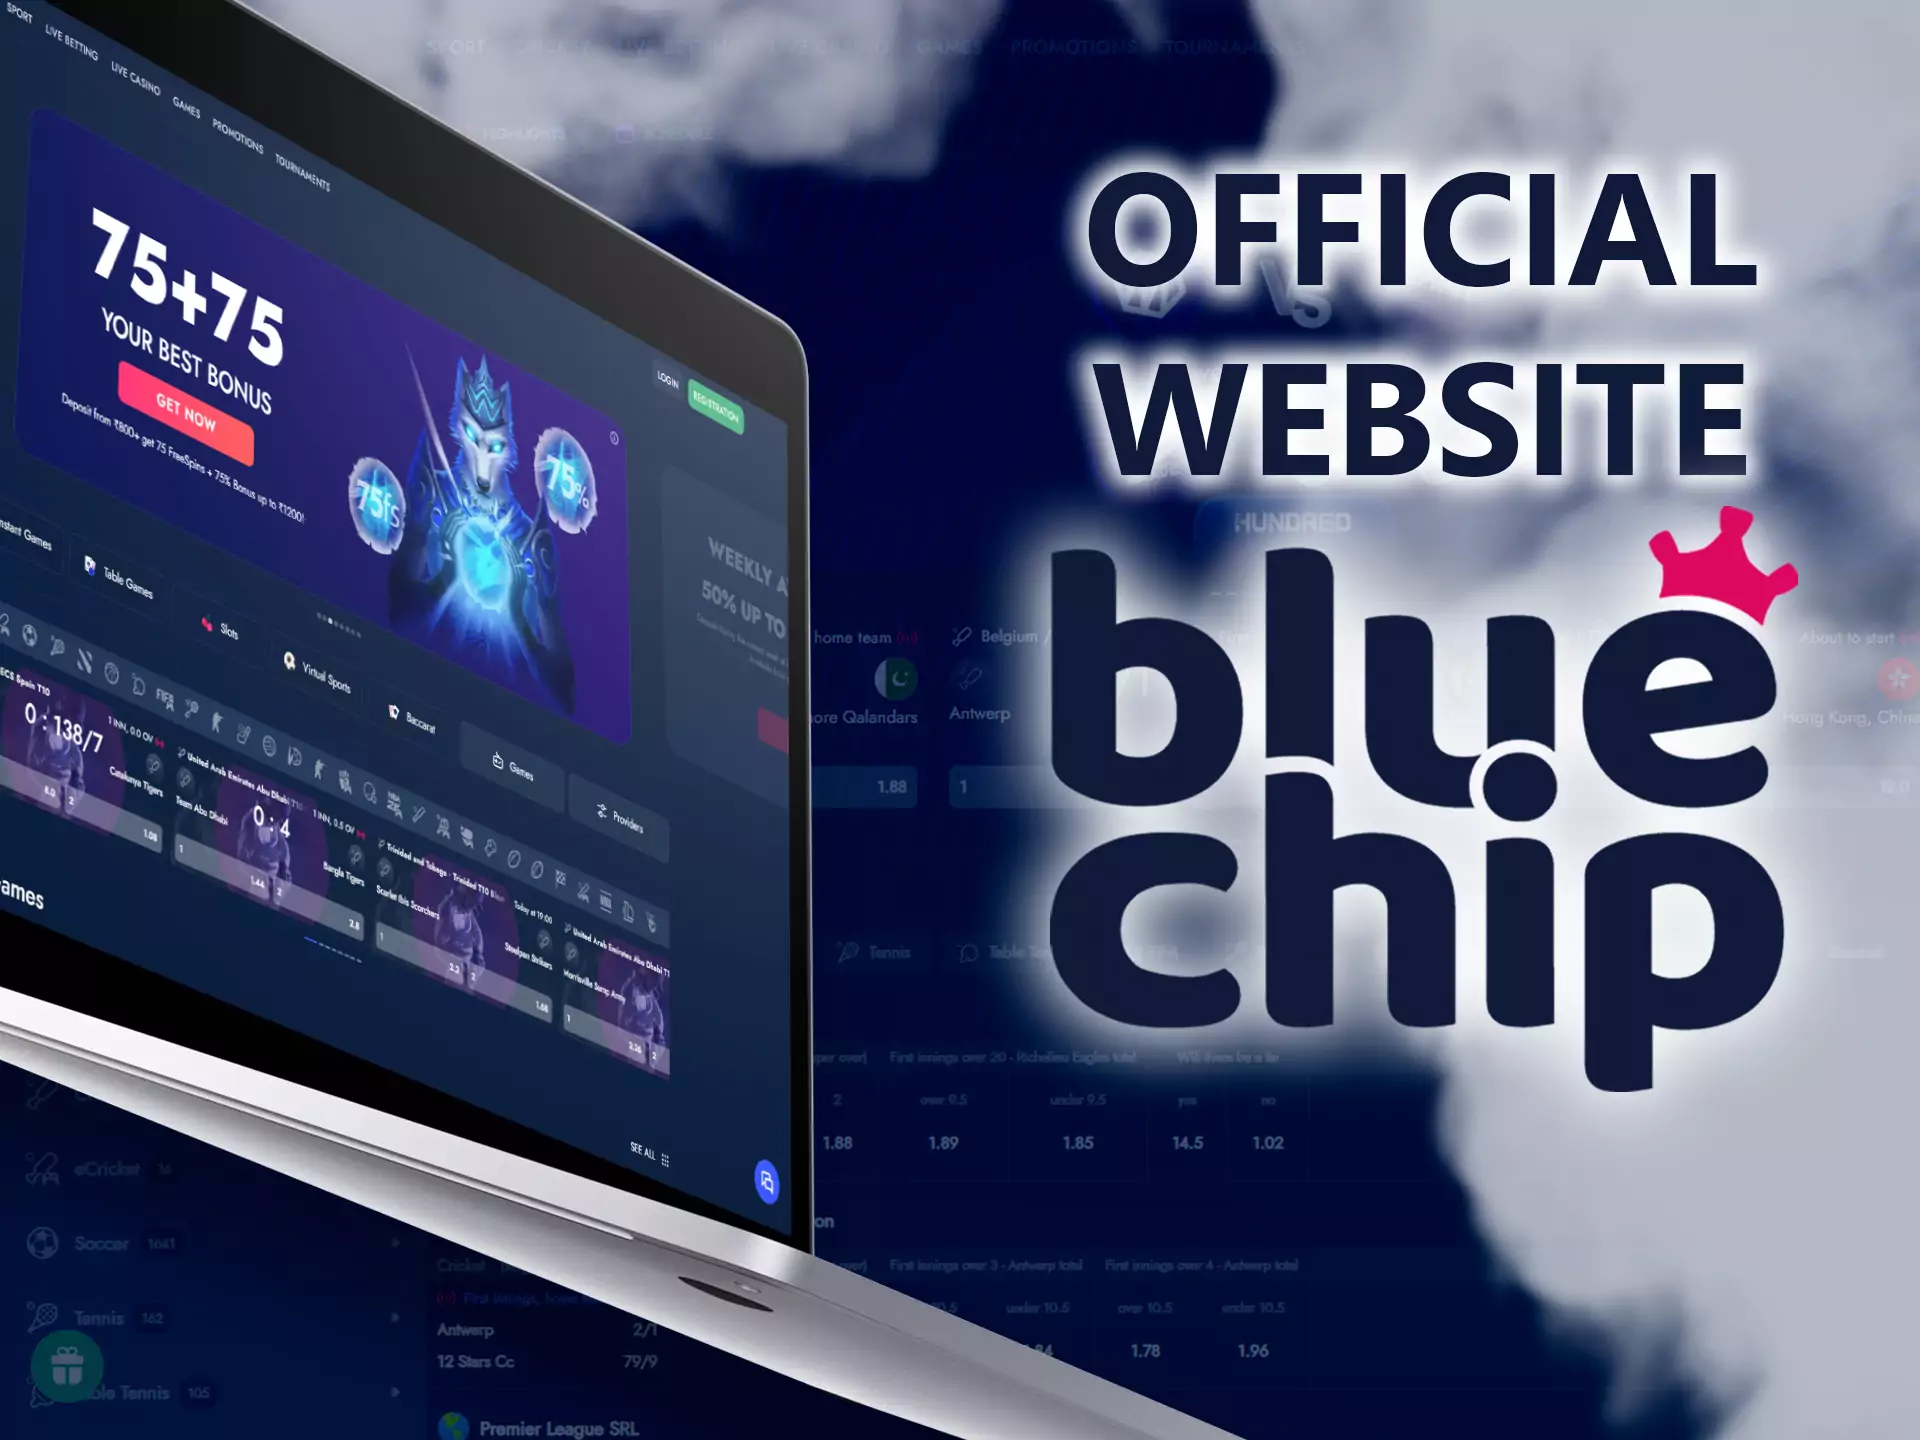 The official website of Bluechip works great on any device.